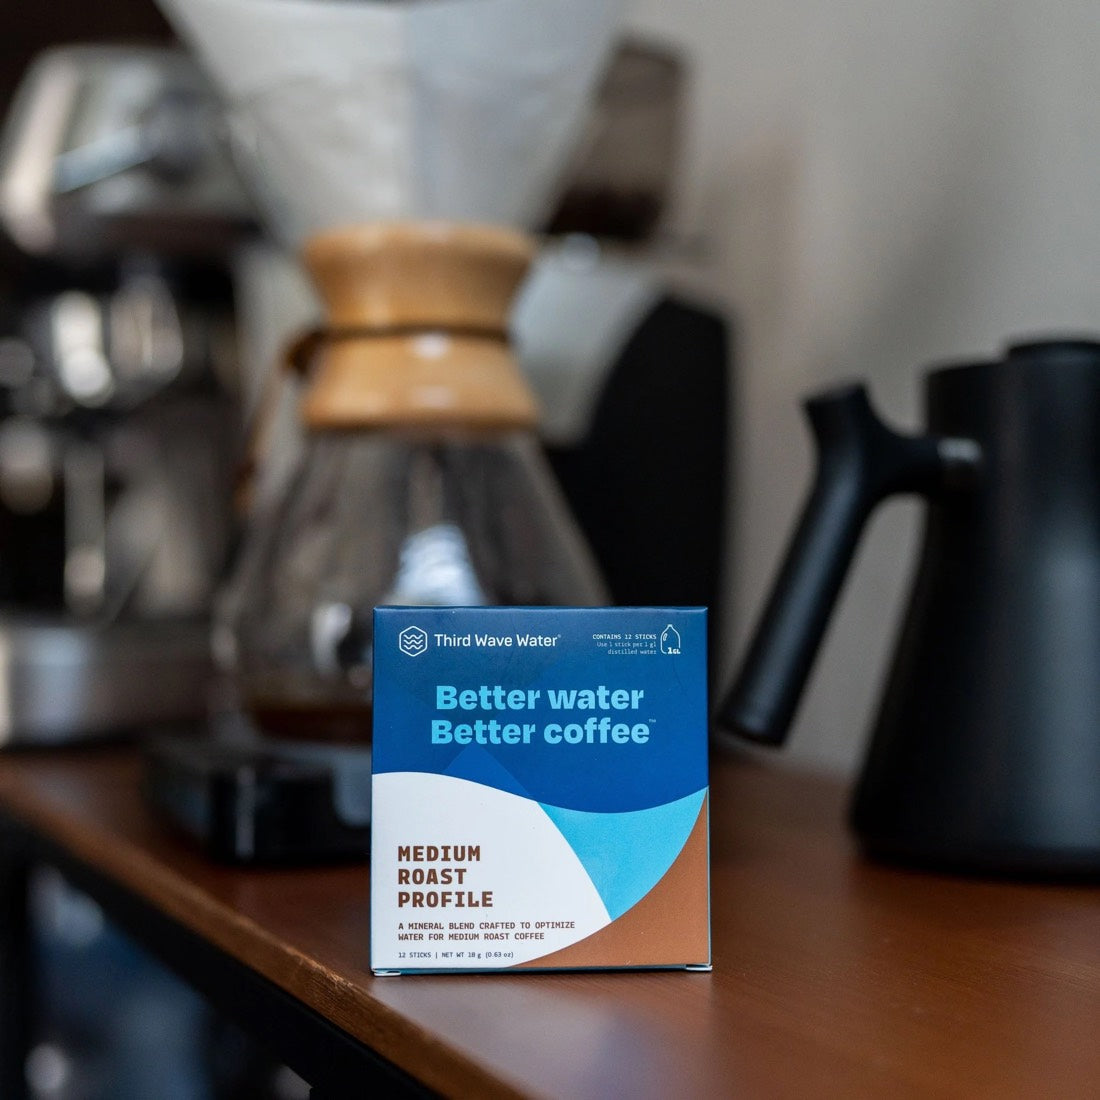 Third Wave Water - Medium Roast Profile - Mineral Packets - Image 6